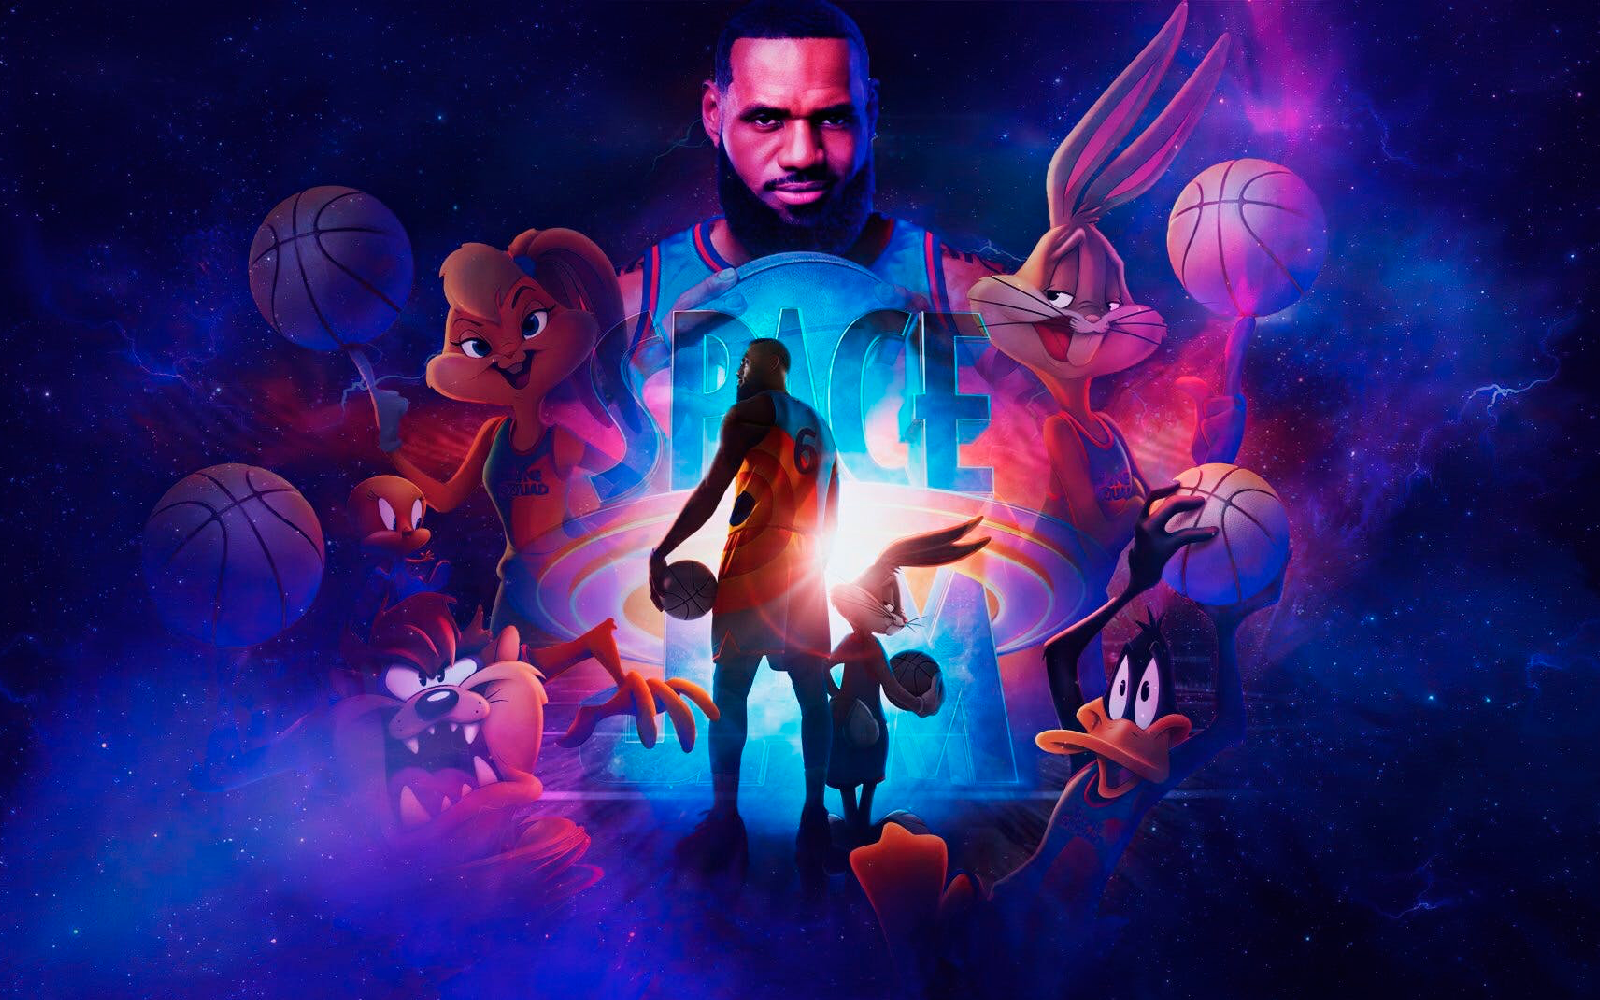 Space Jam: A New Legacy' Starring LeBron James, in Cinemas Now